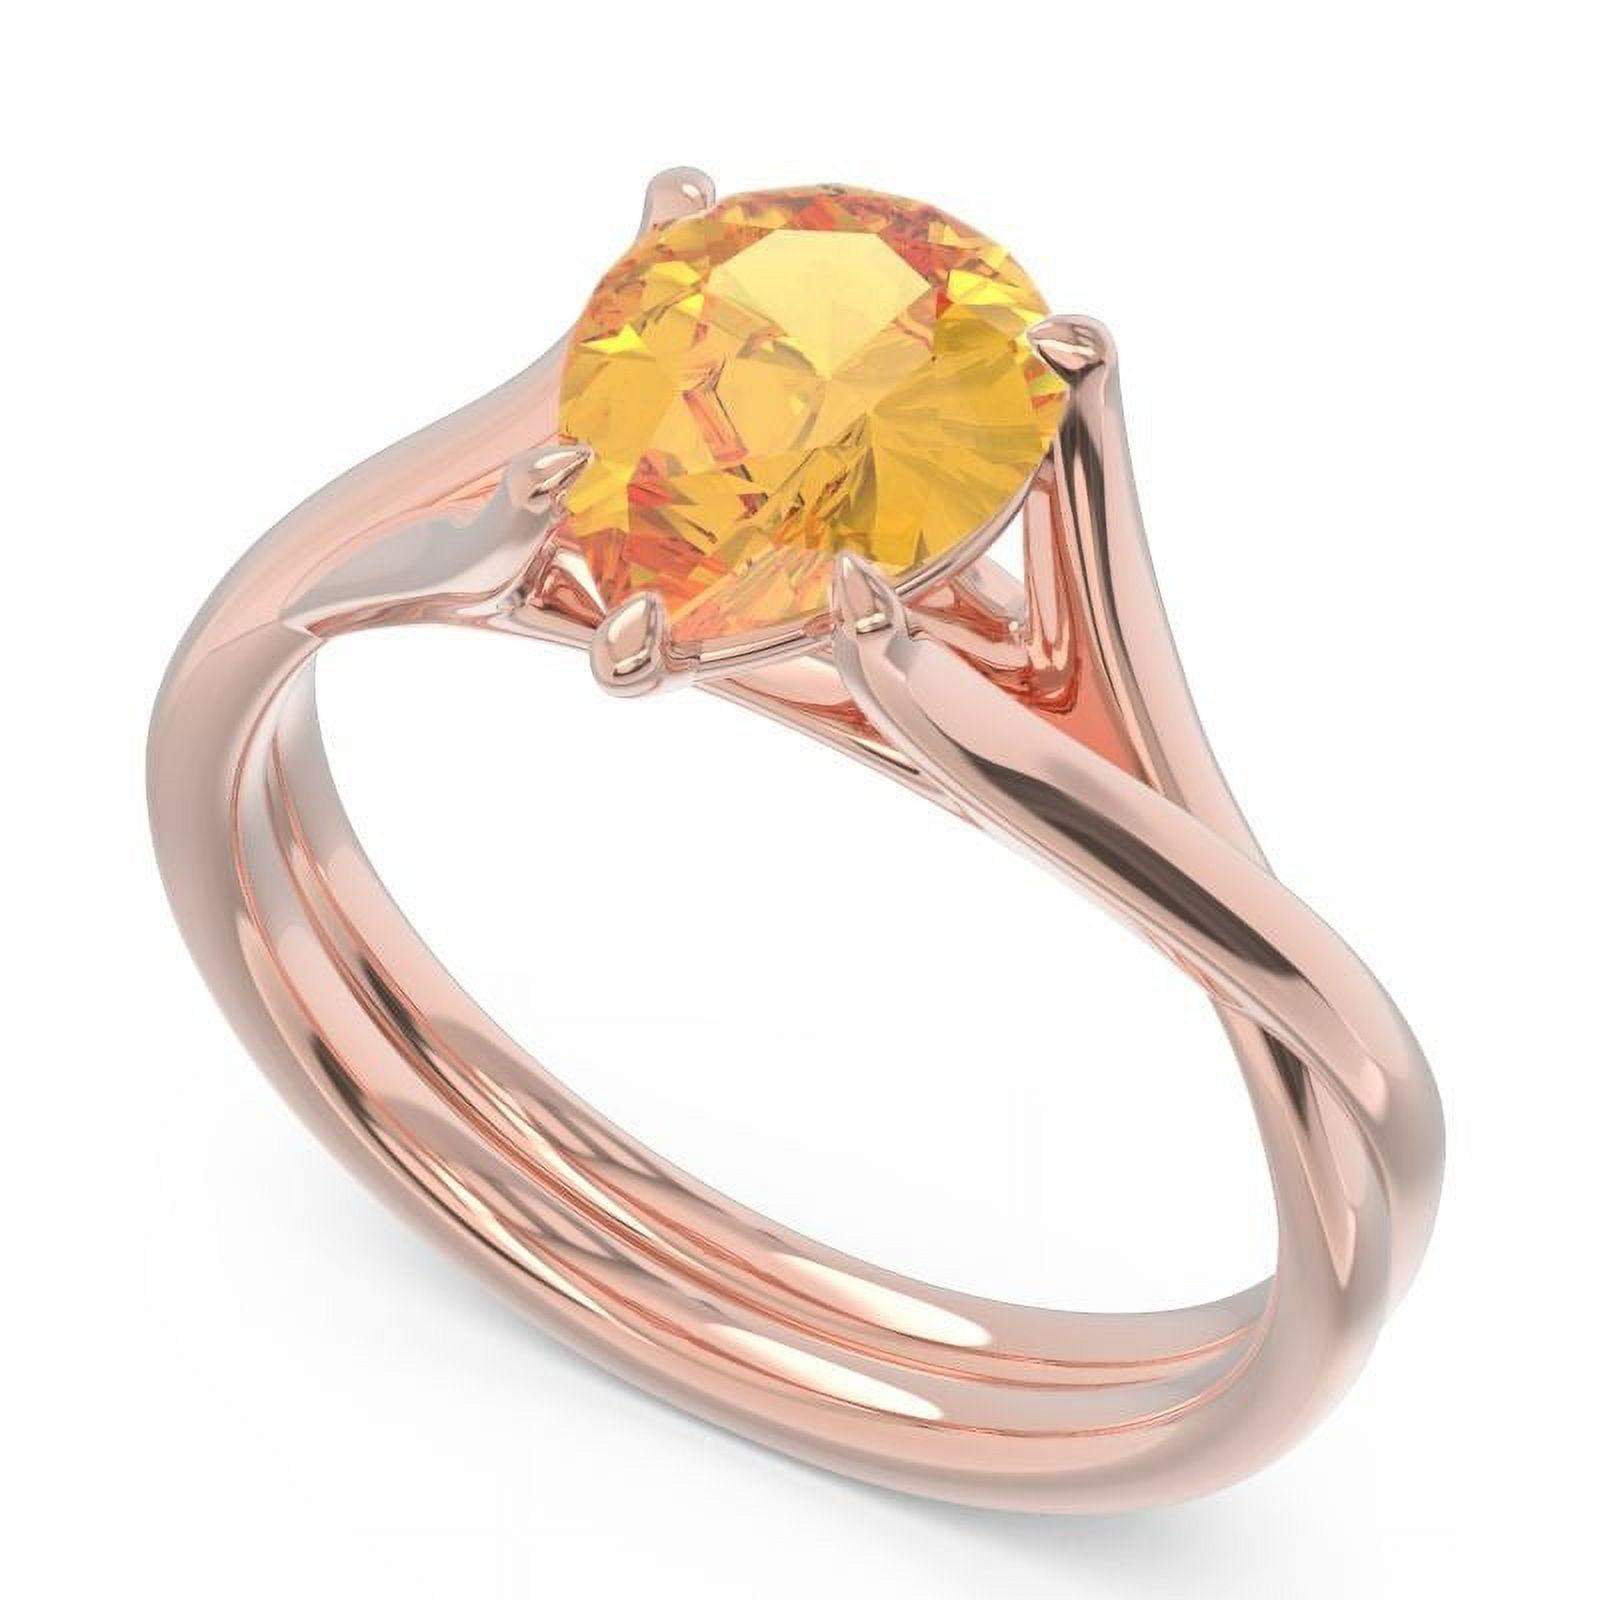 2.00 Carat Pear Cut Citrine Gemstone New Solitaire Engagement Ring for ...